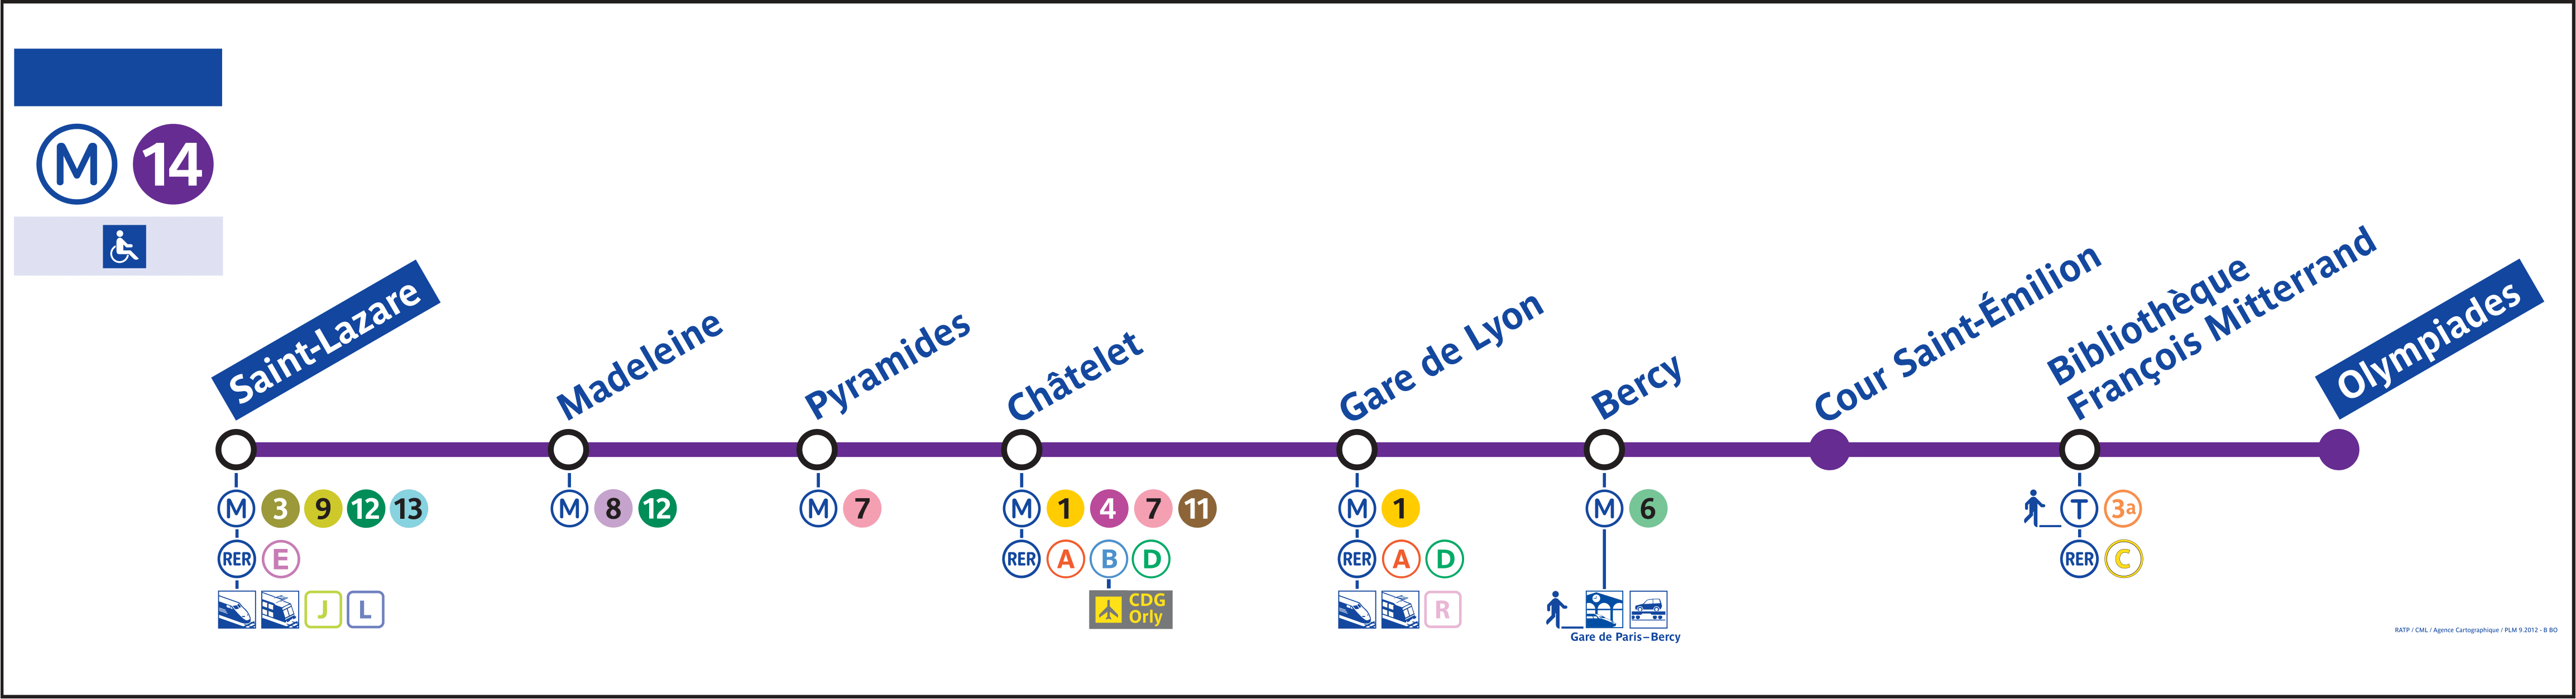 Timetable first and last metro line 14 Paris - Night Fox Tips